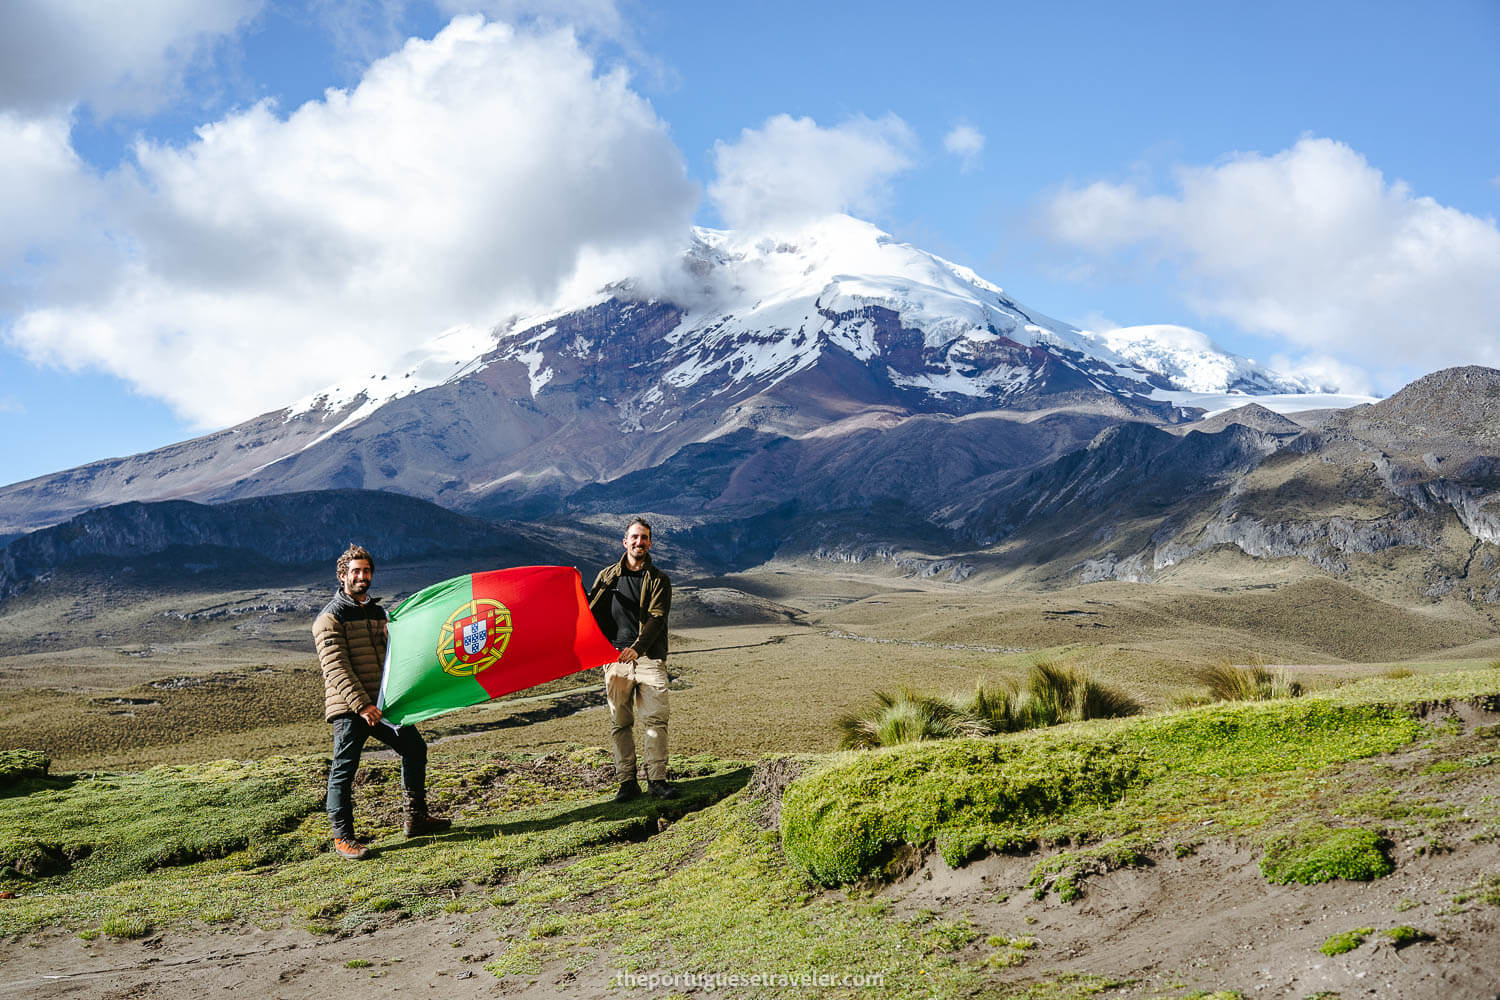 Me and Miguel my Portuguese friend at the basecamp of Carihuairazo looking at Chimborazo